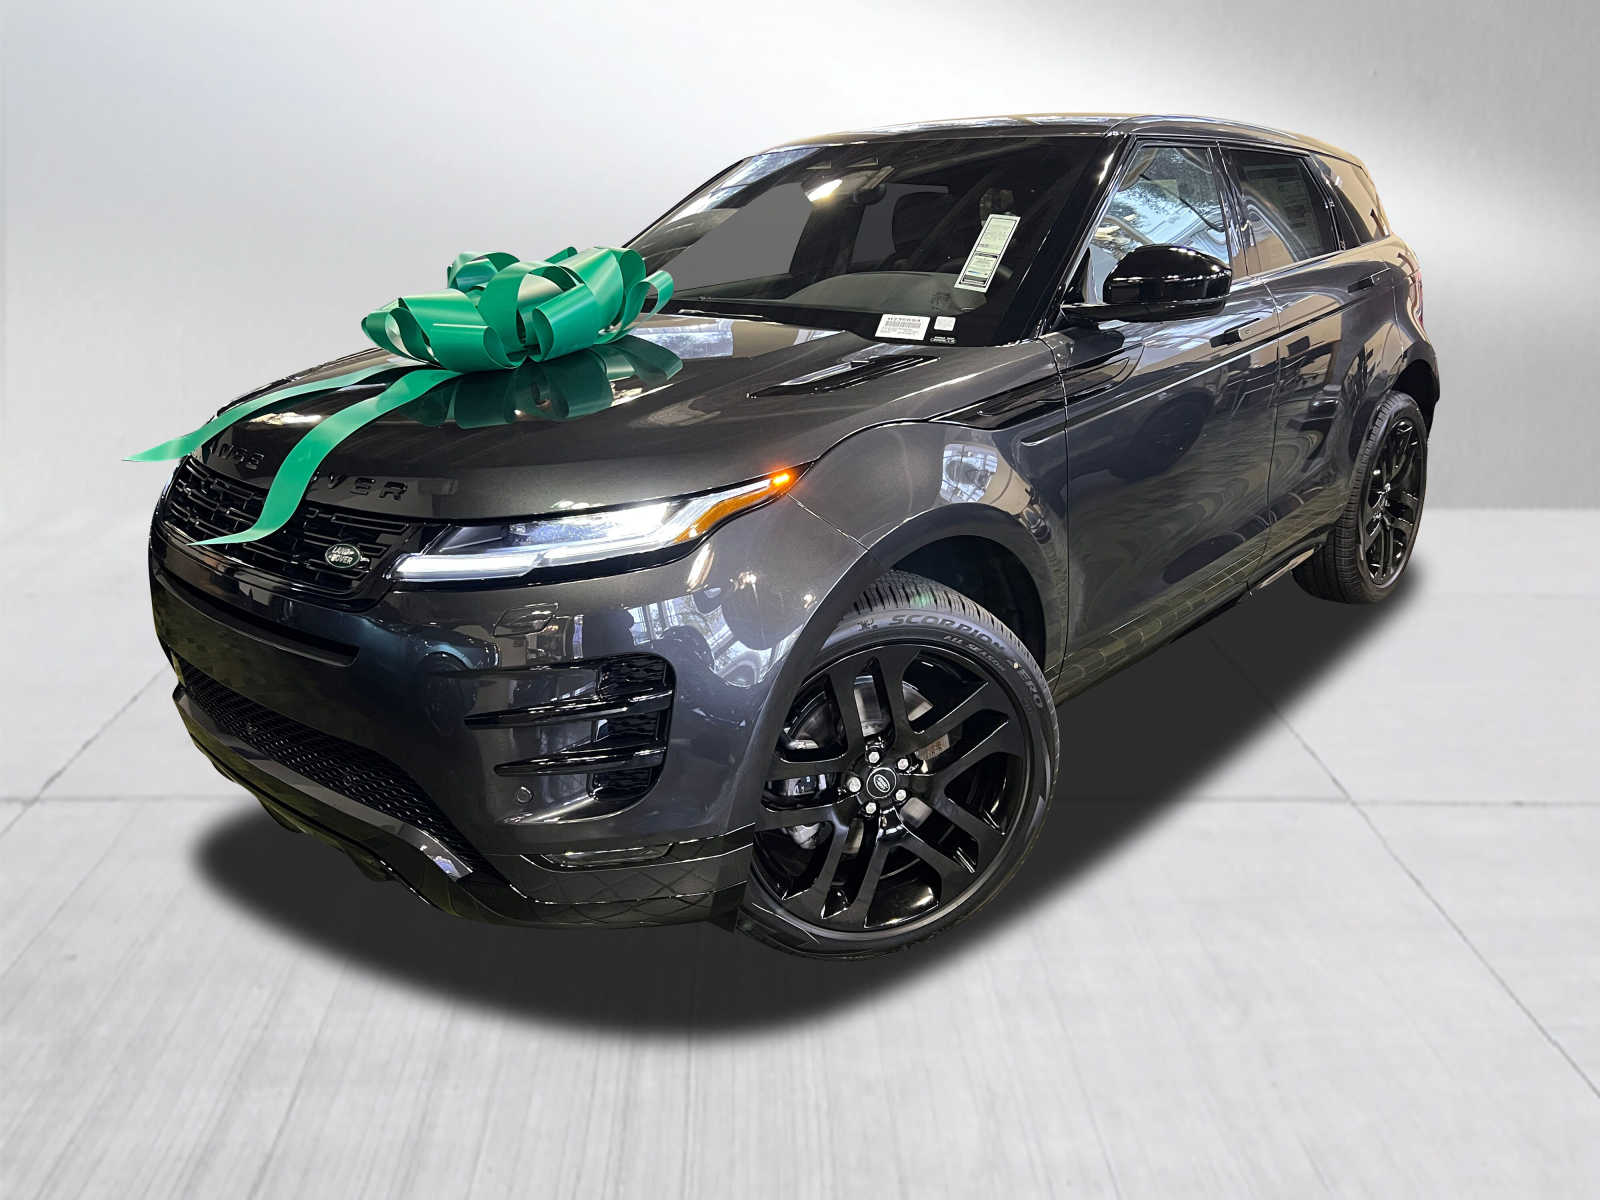 2021 Land Rover Range Rover Evoque Keeps Its Good Looks, Trades Its Old Tech